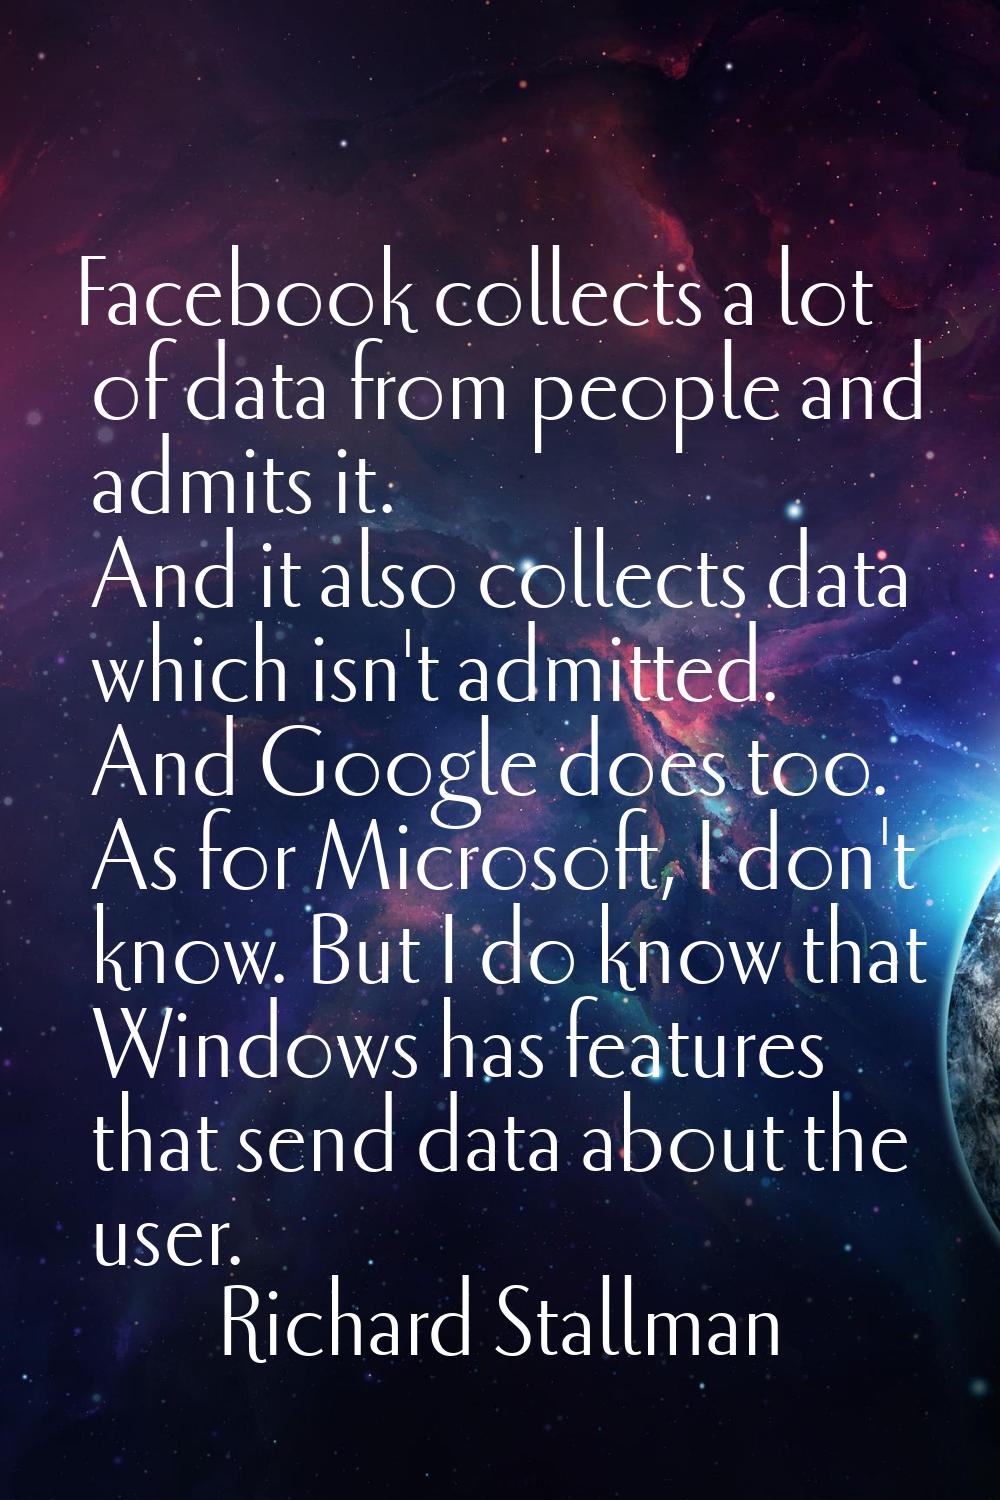 Facebook collects a lot of data from people and admits it. And it also collects data which isn't ad